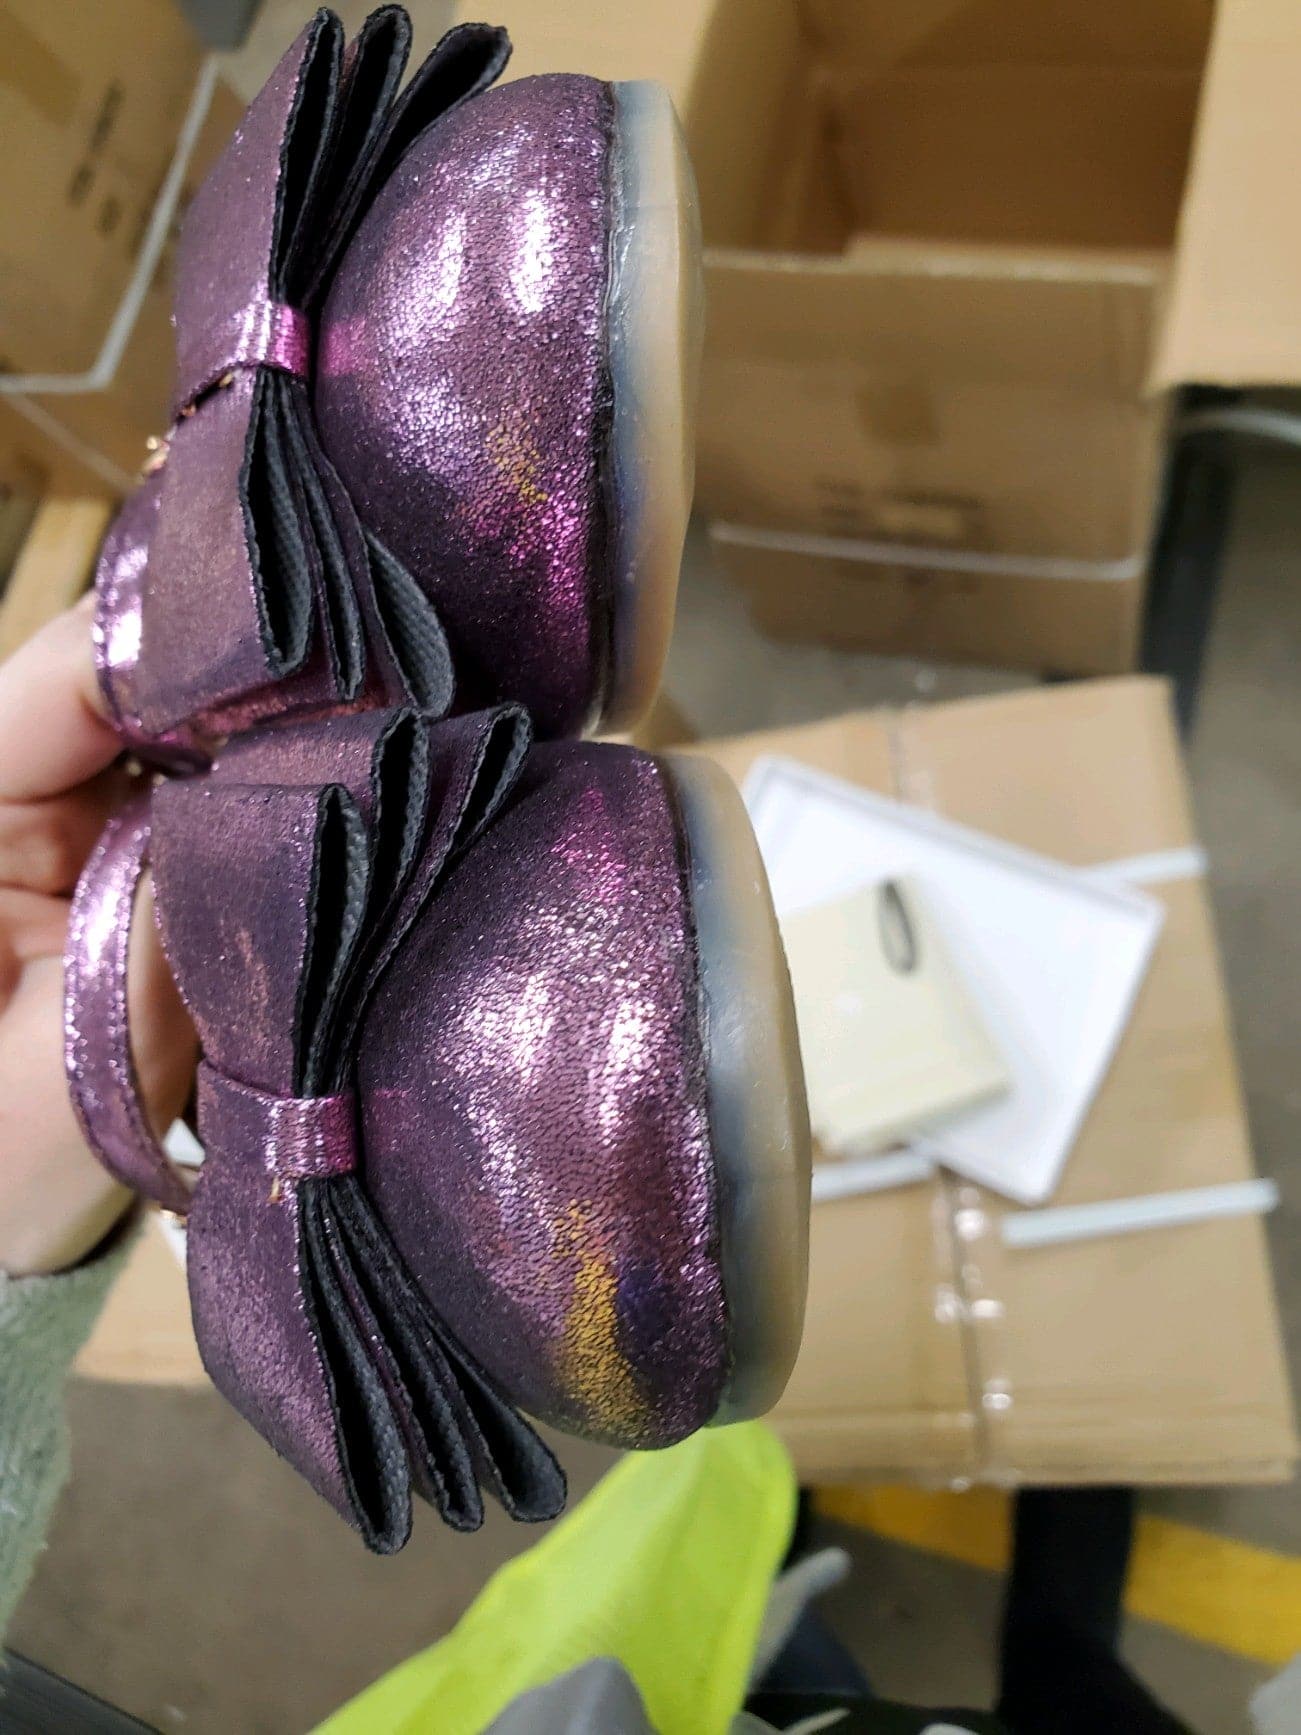 [Eggplant Shimmer] Bow Shoes